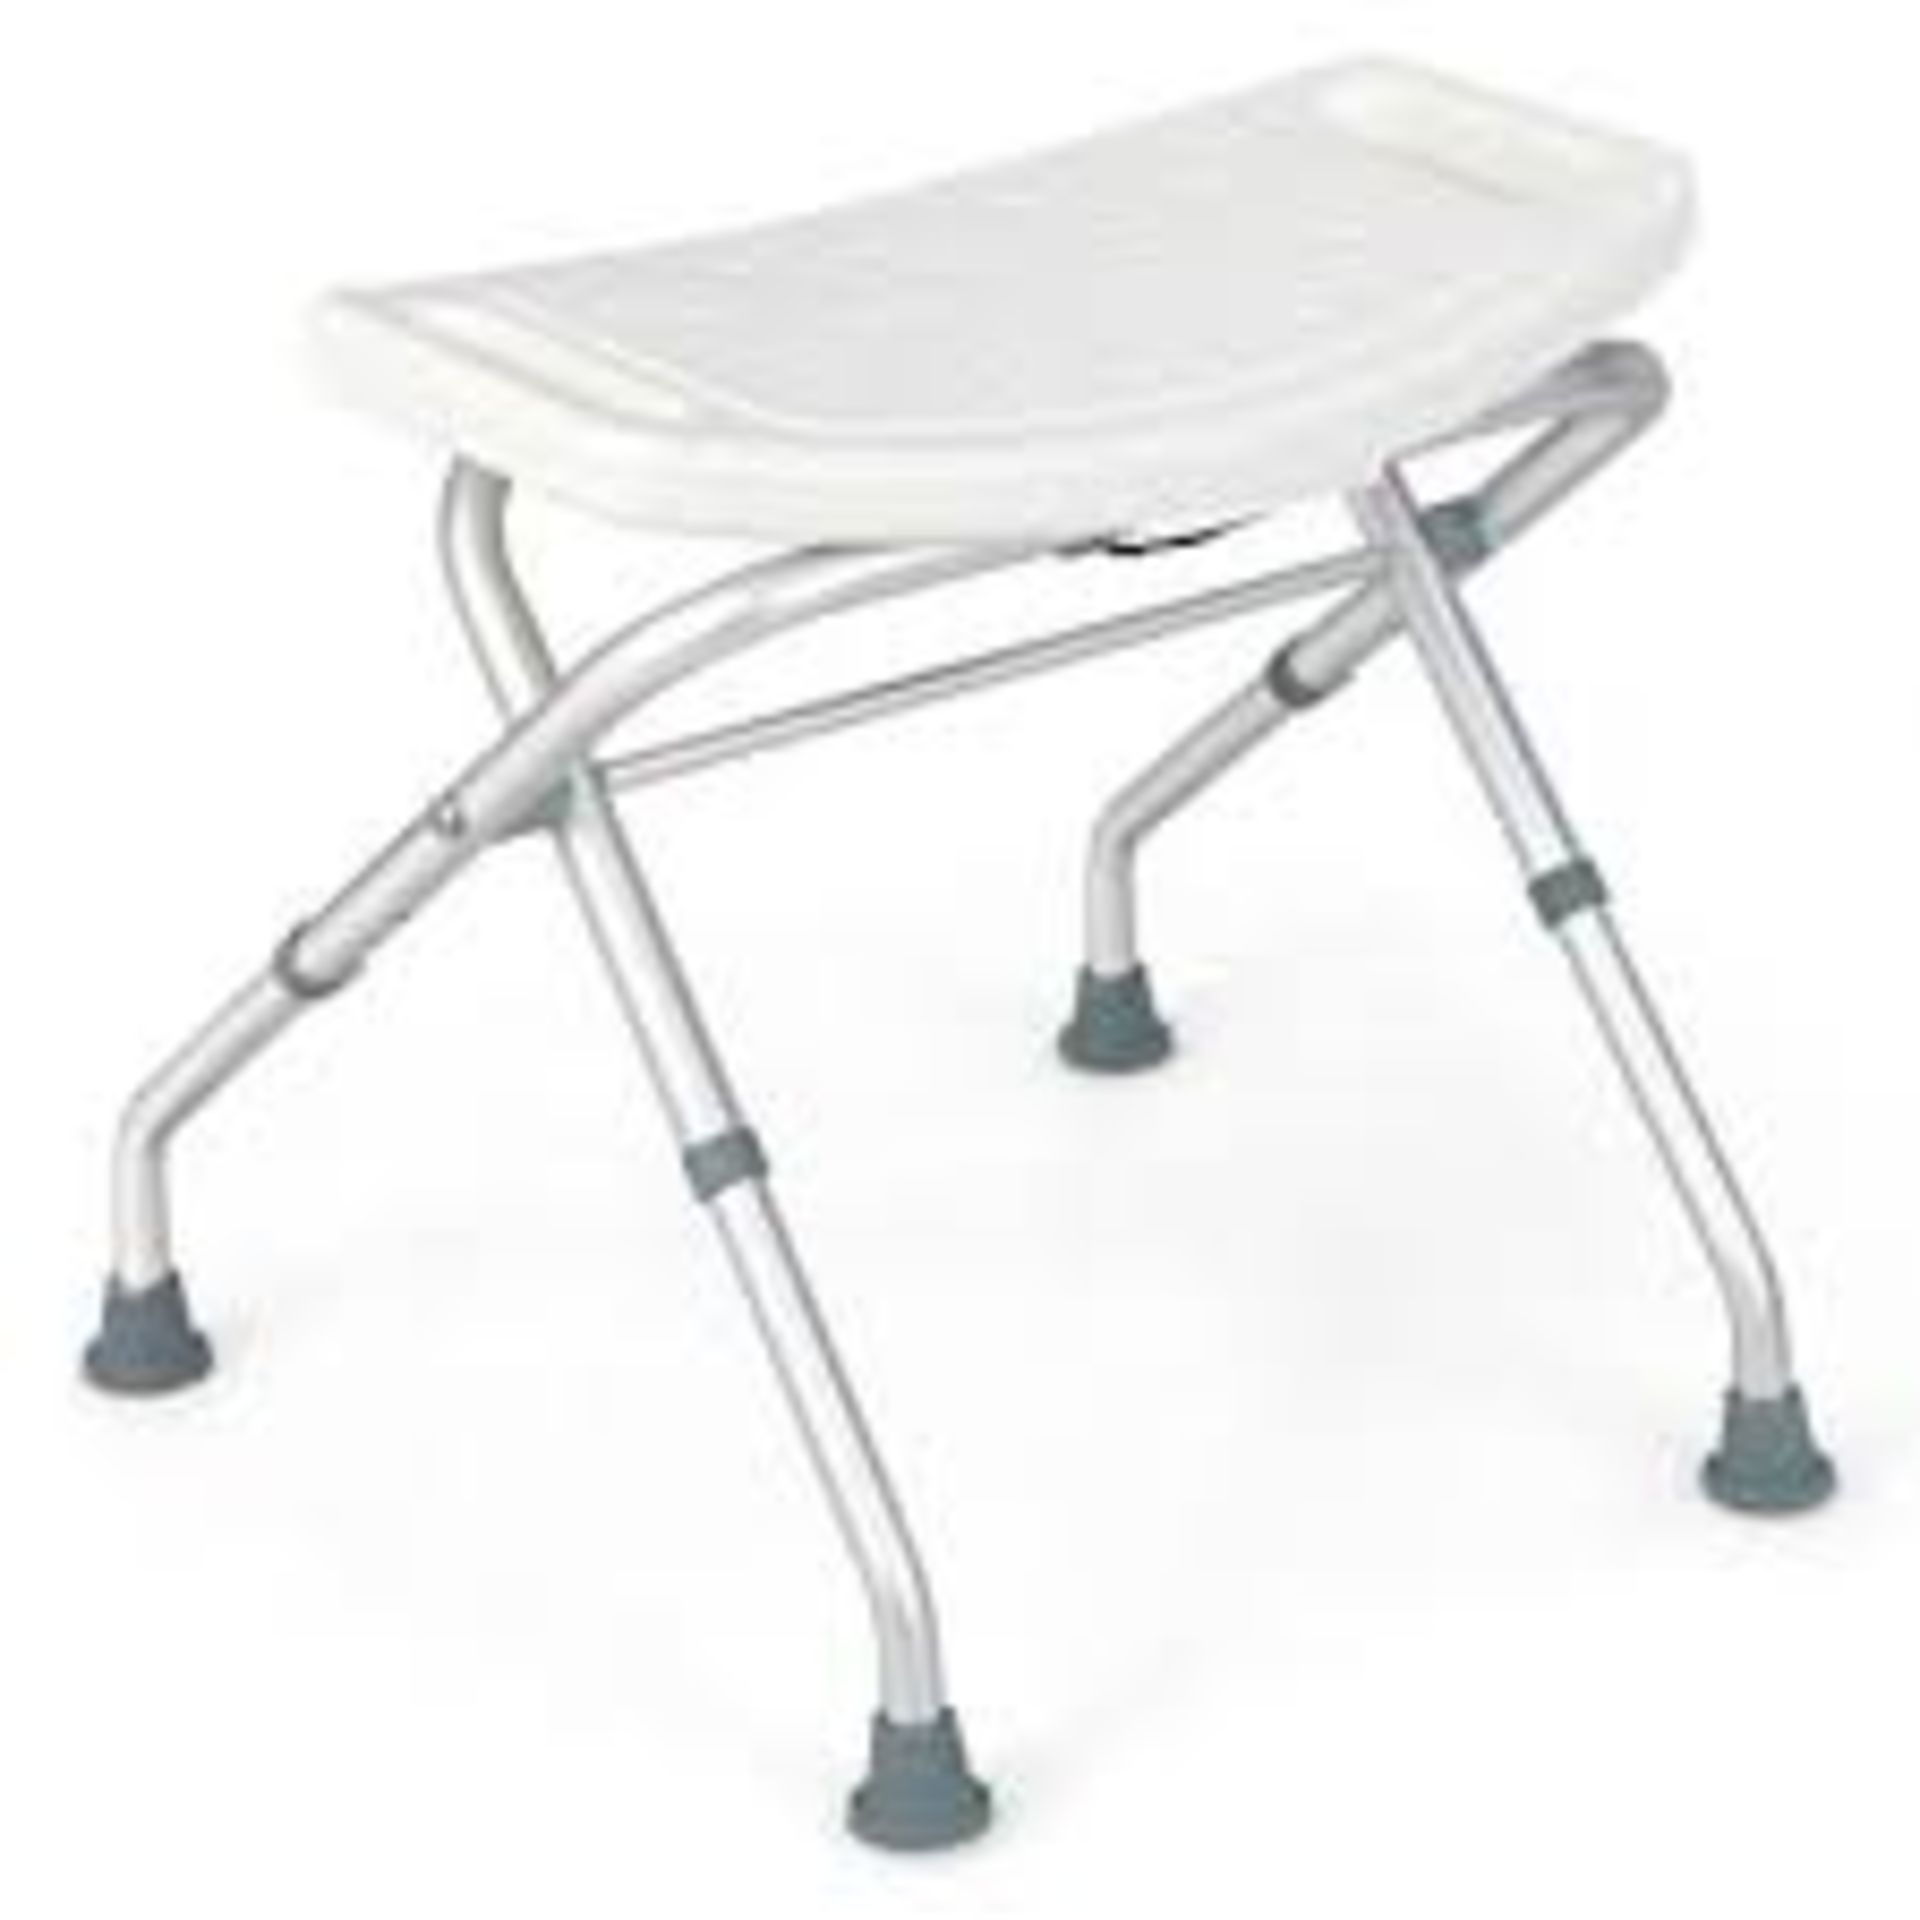 Folding Portable Shower Seat with Adjustable Height for Bathroom. - R13a.9.